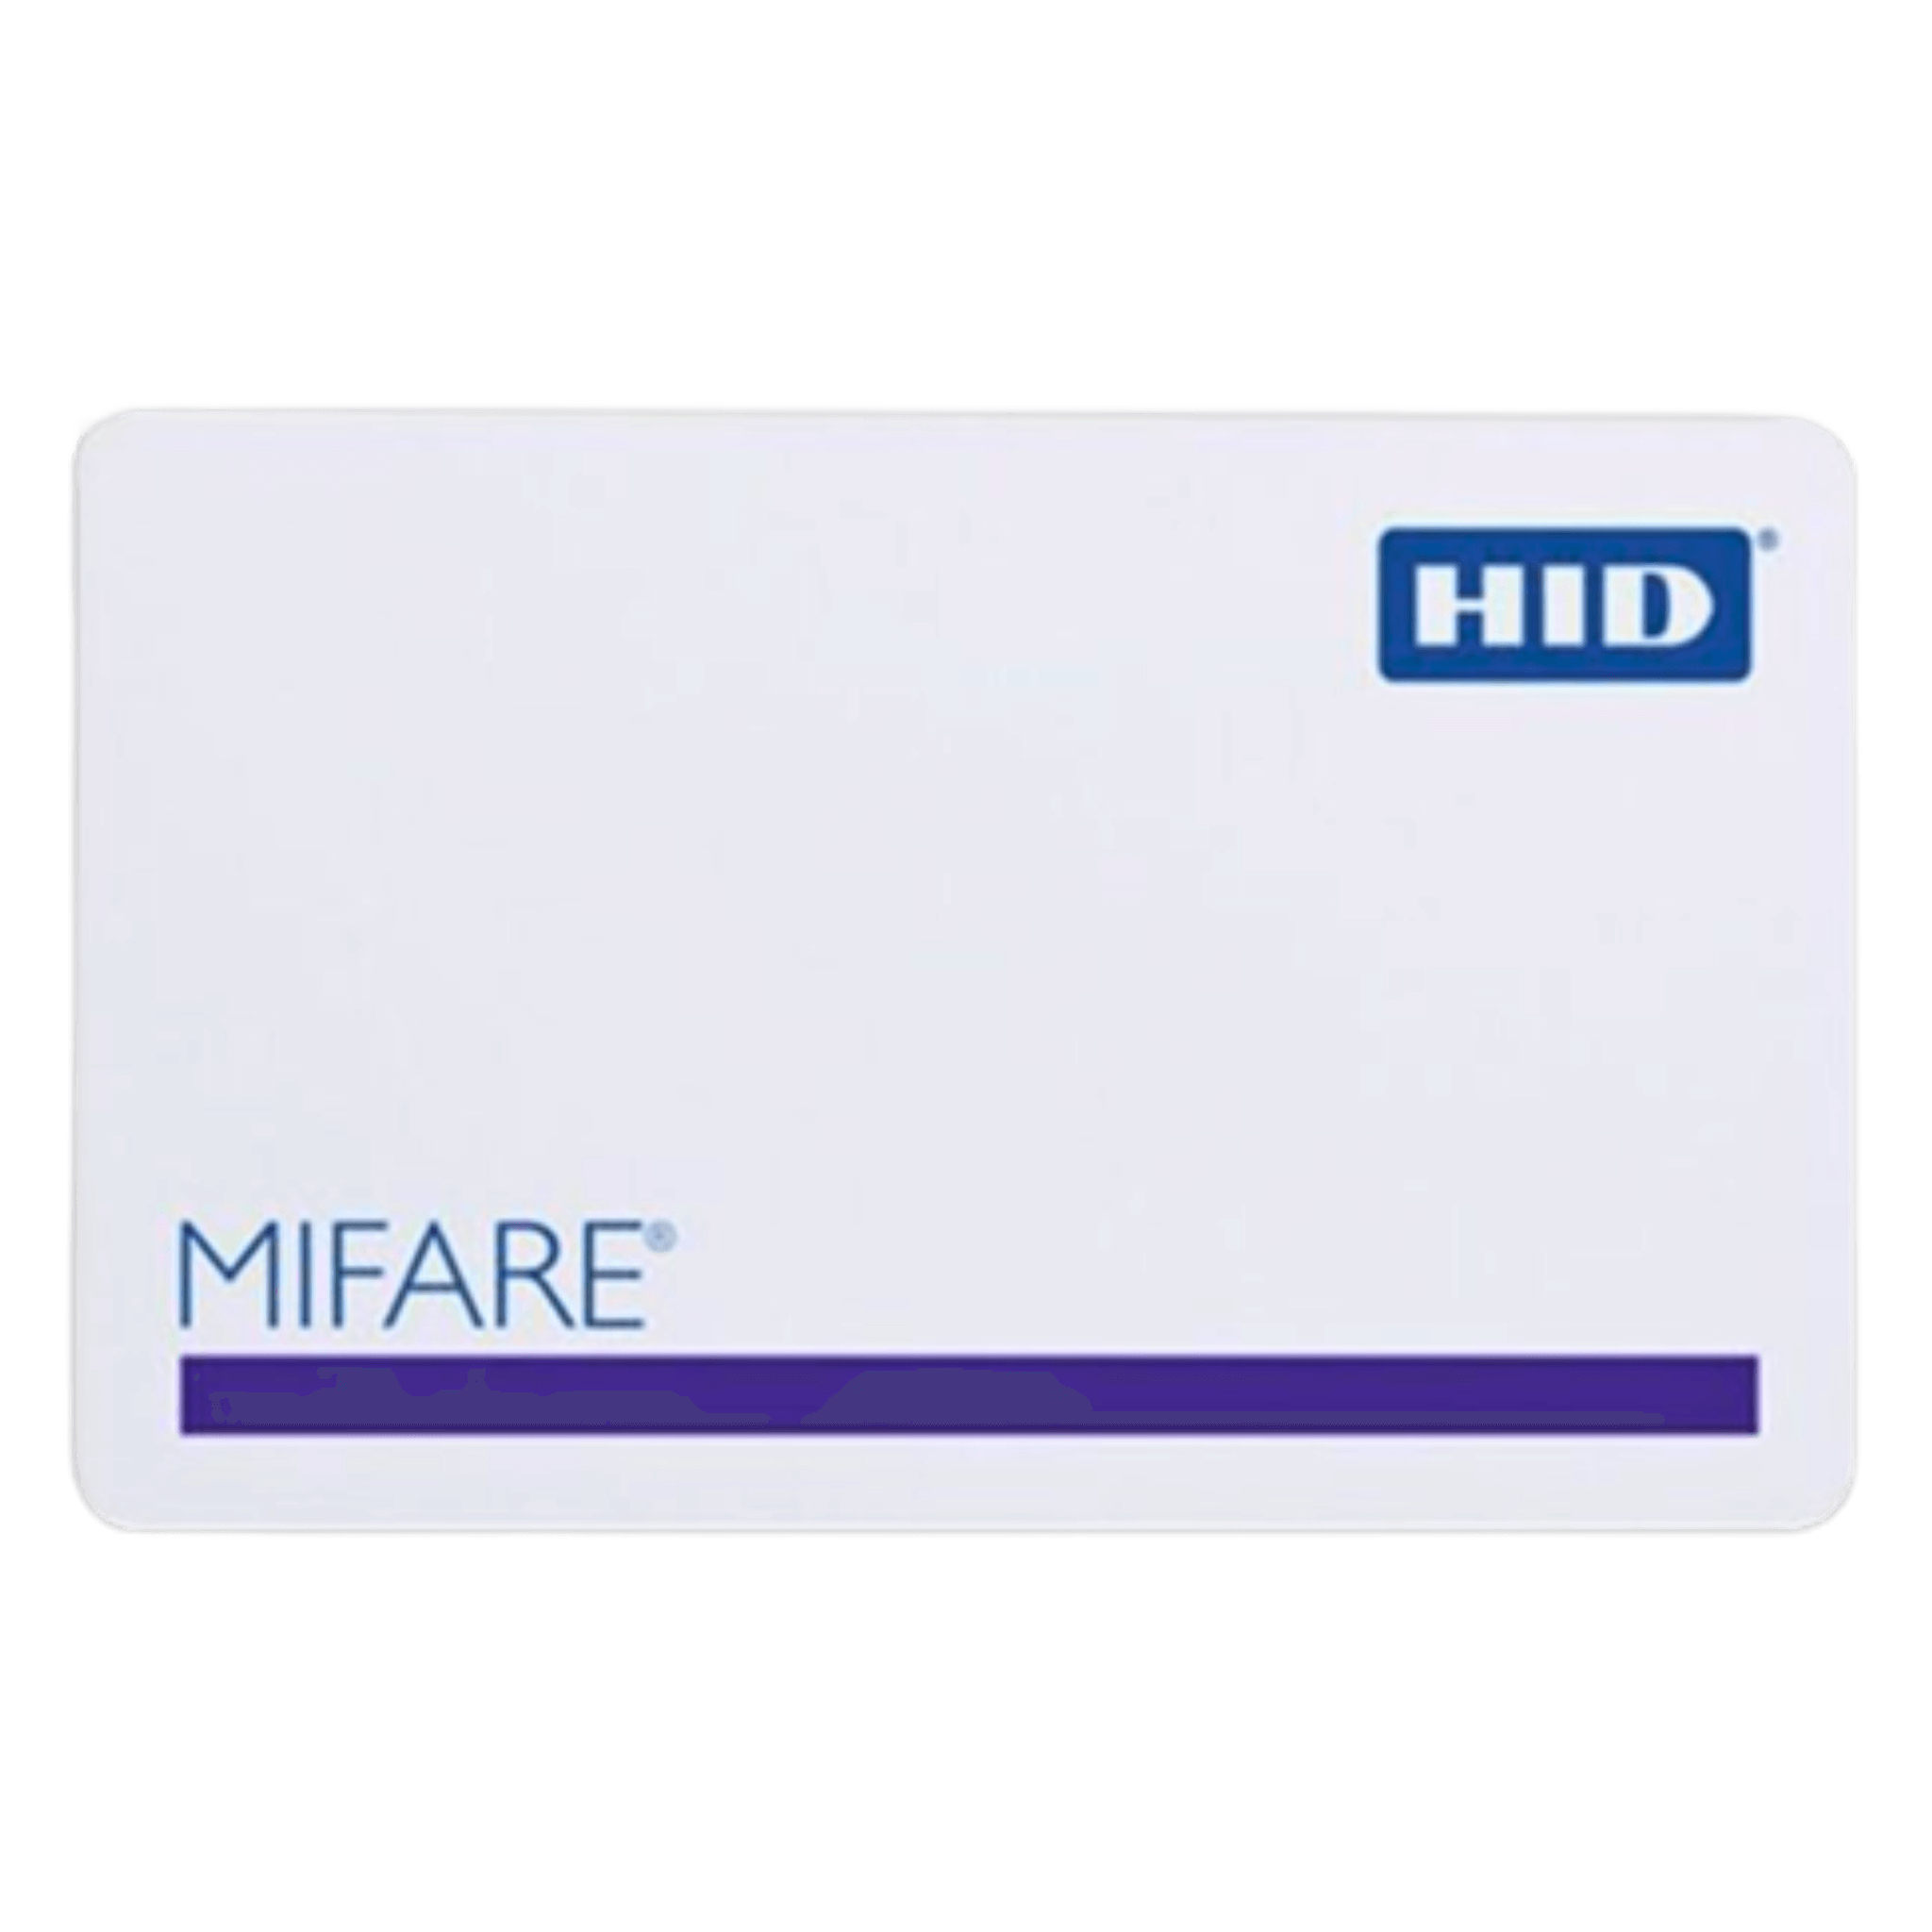 HID 1430 MIFARE Classic® Proximity Cards, 100 Pack